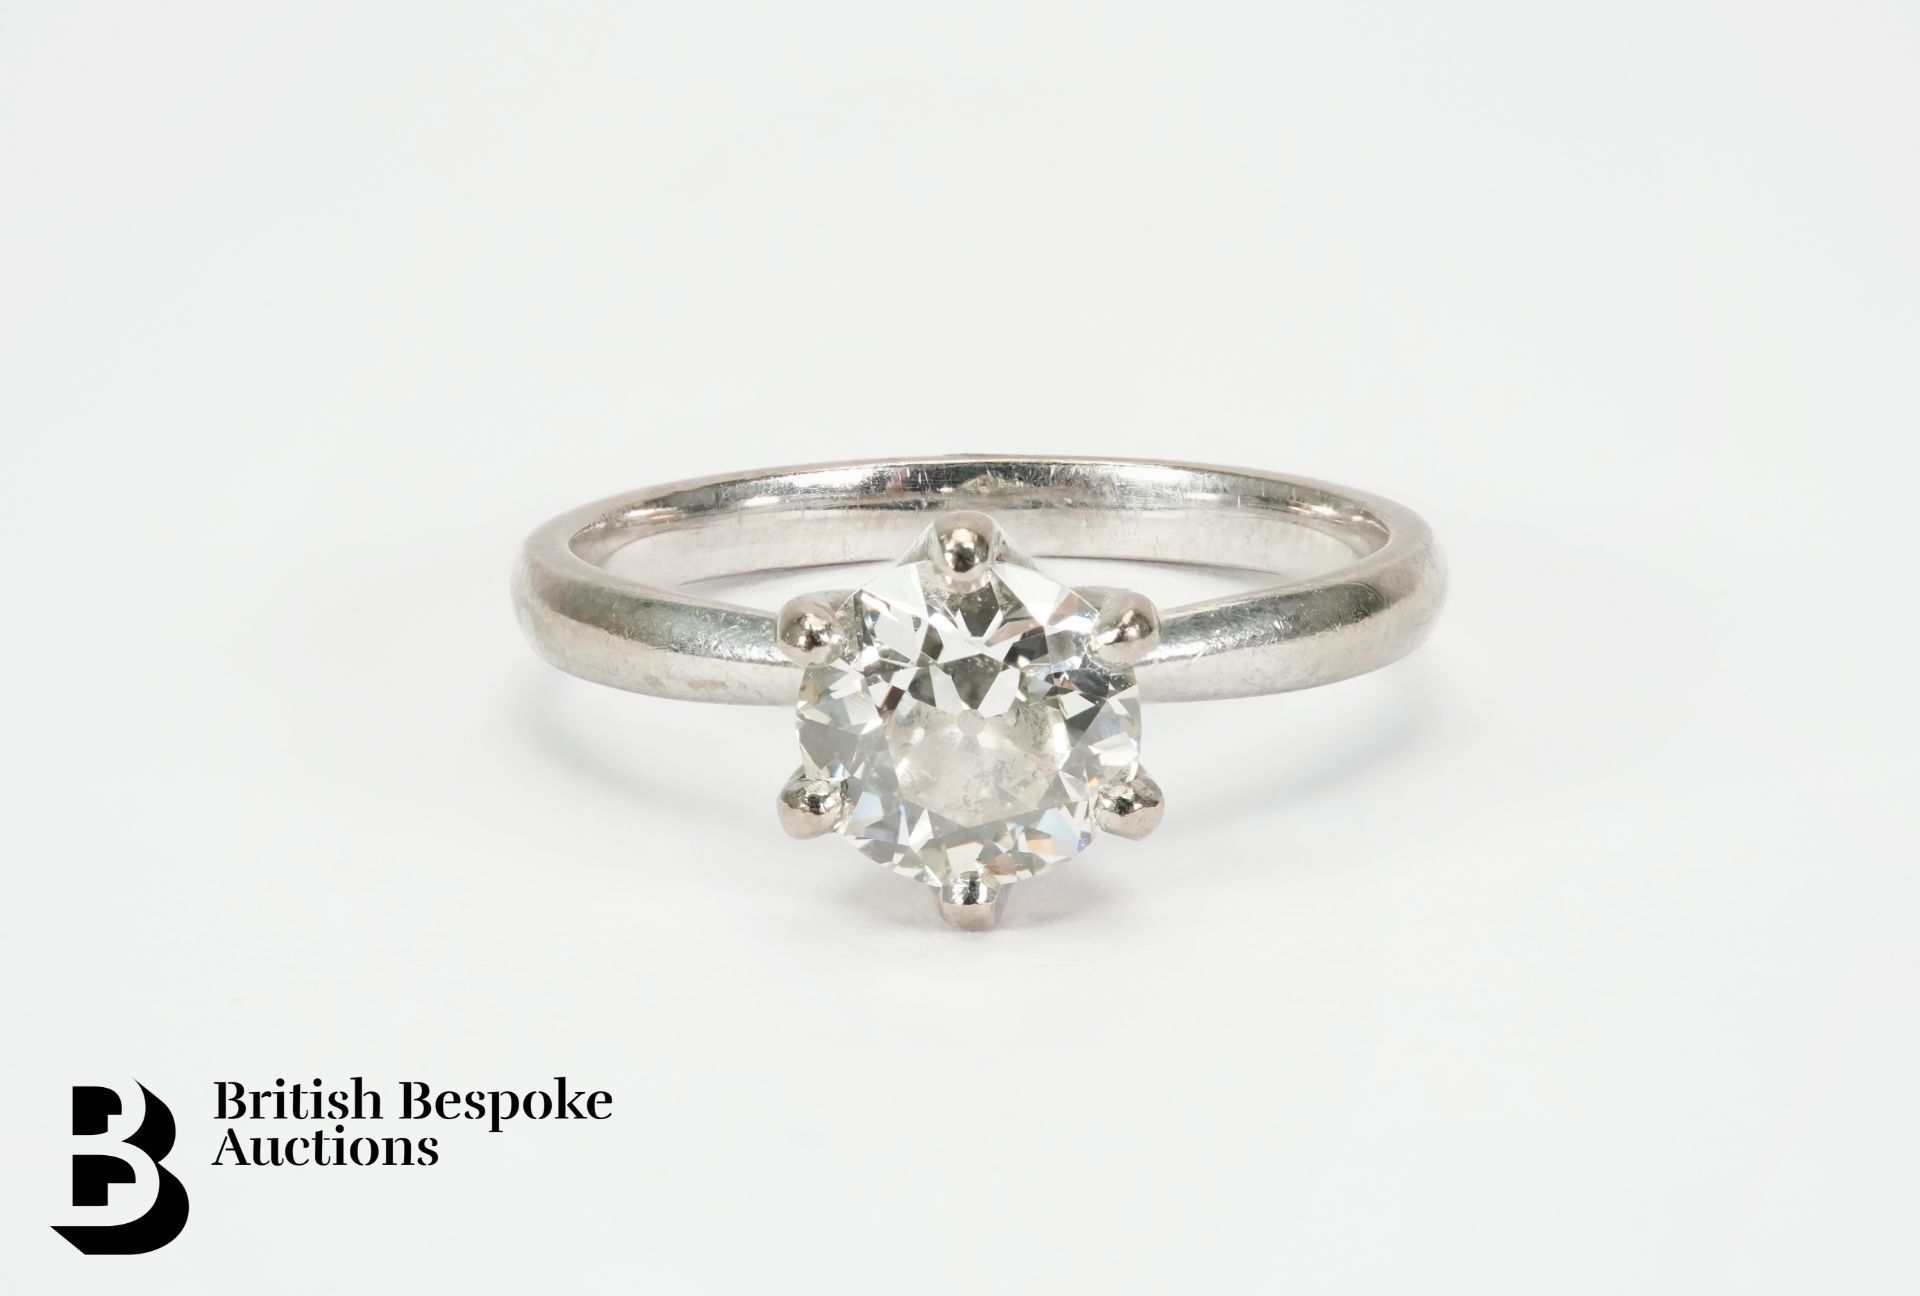 18ct White Gold 1.6ct Solitaire Diamond Ring - Image 3 of 3